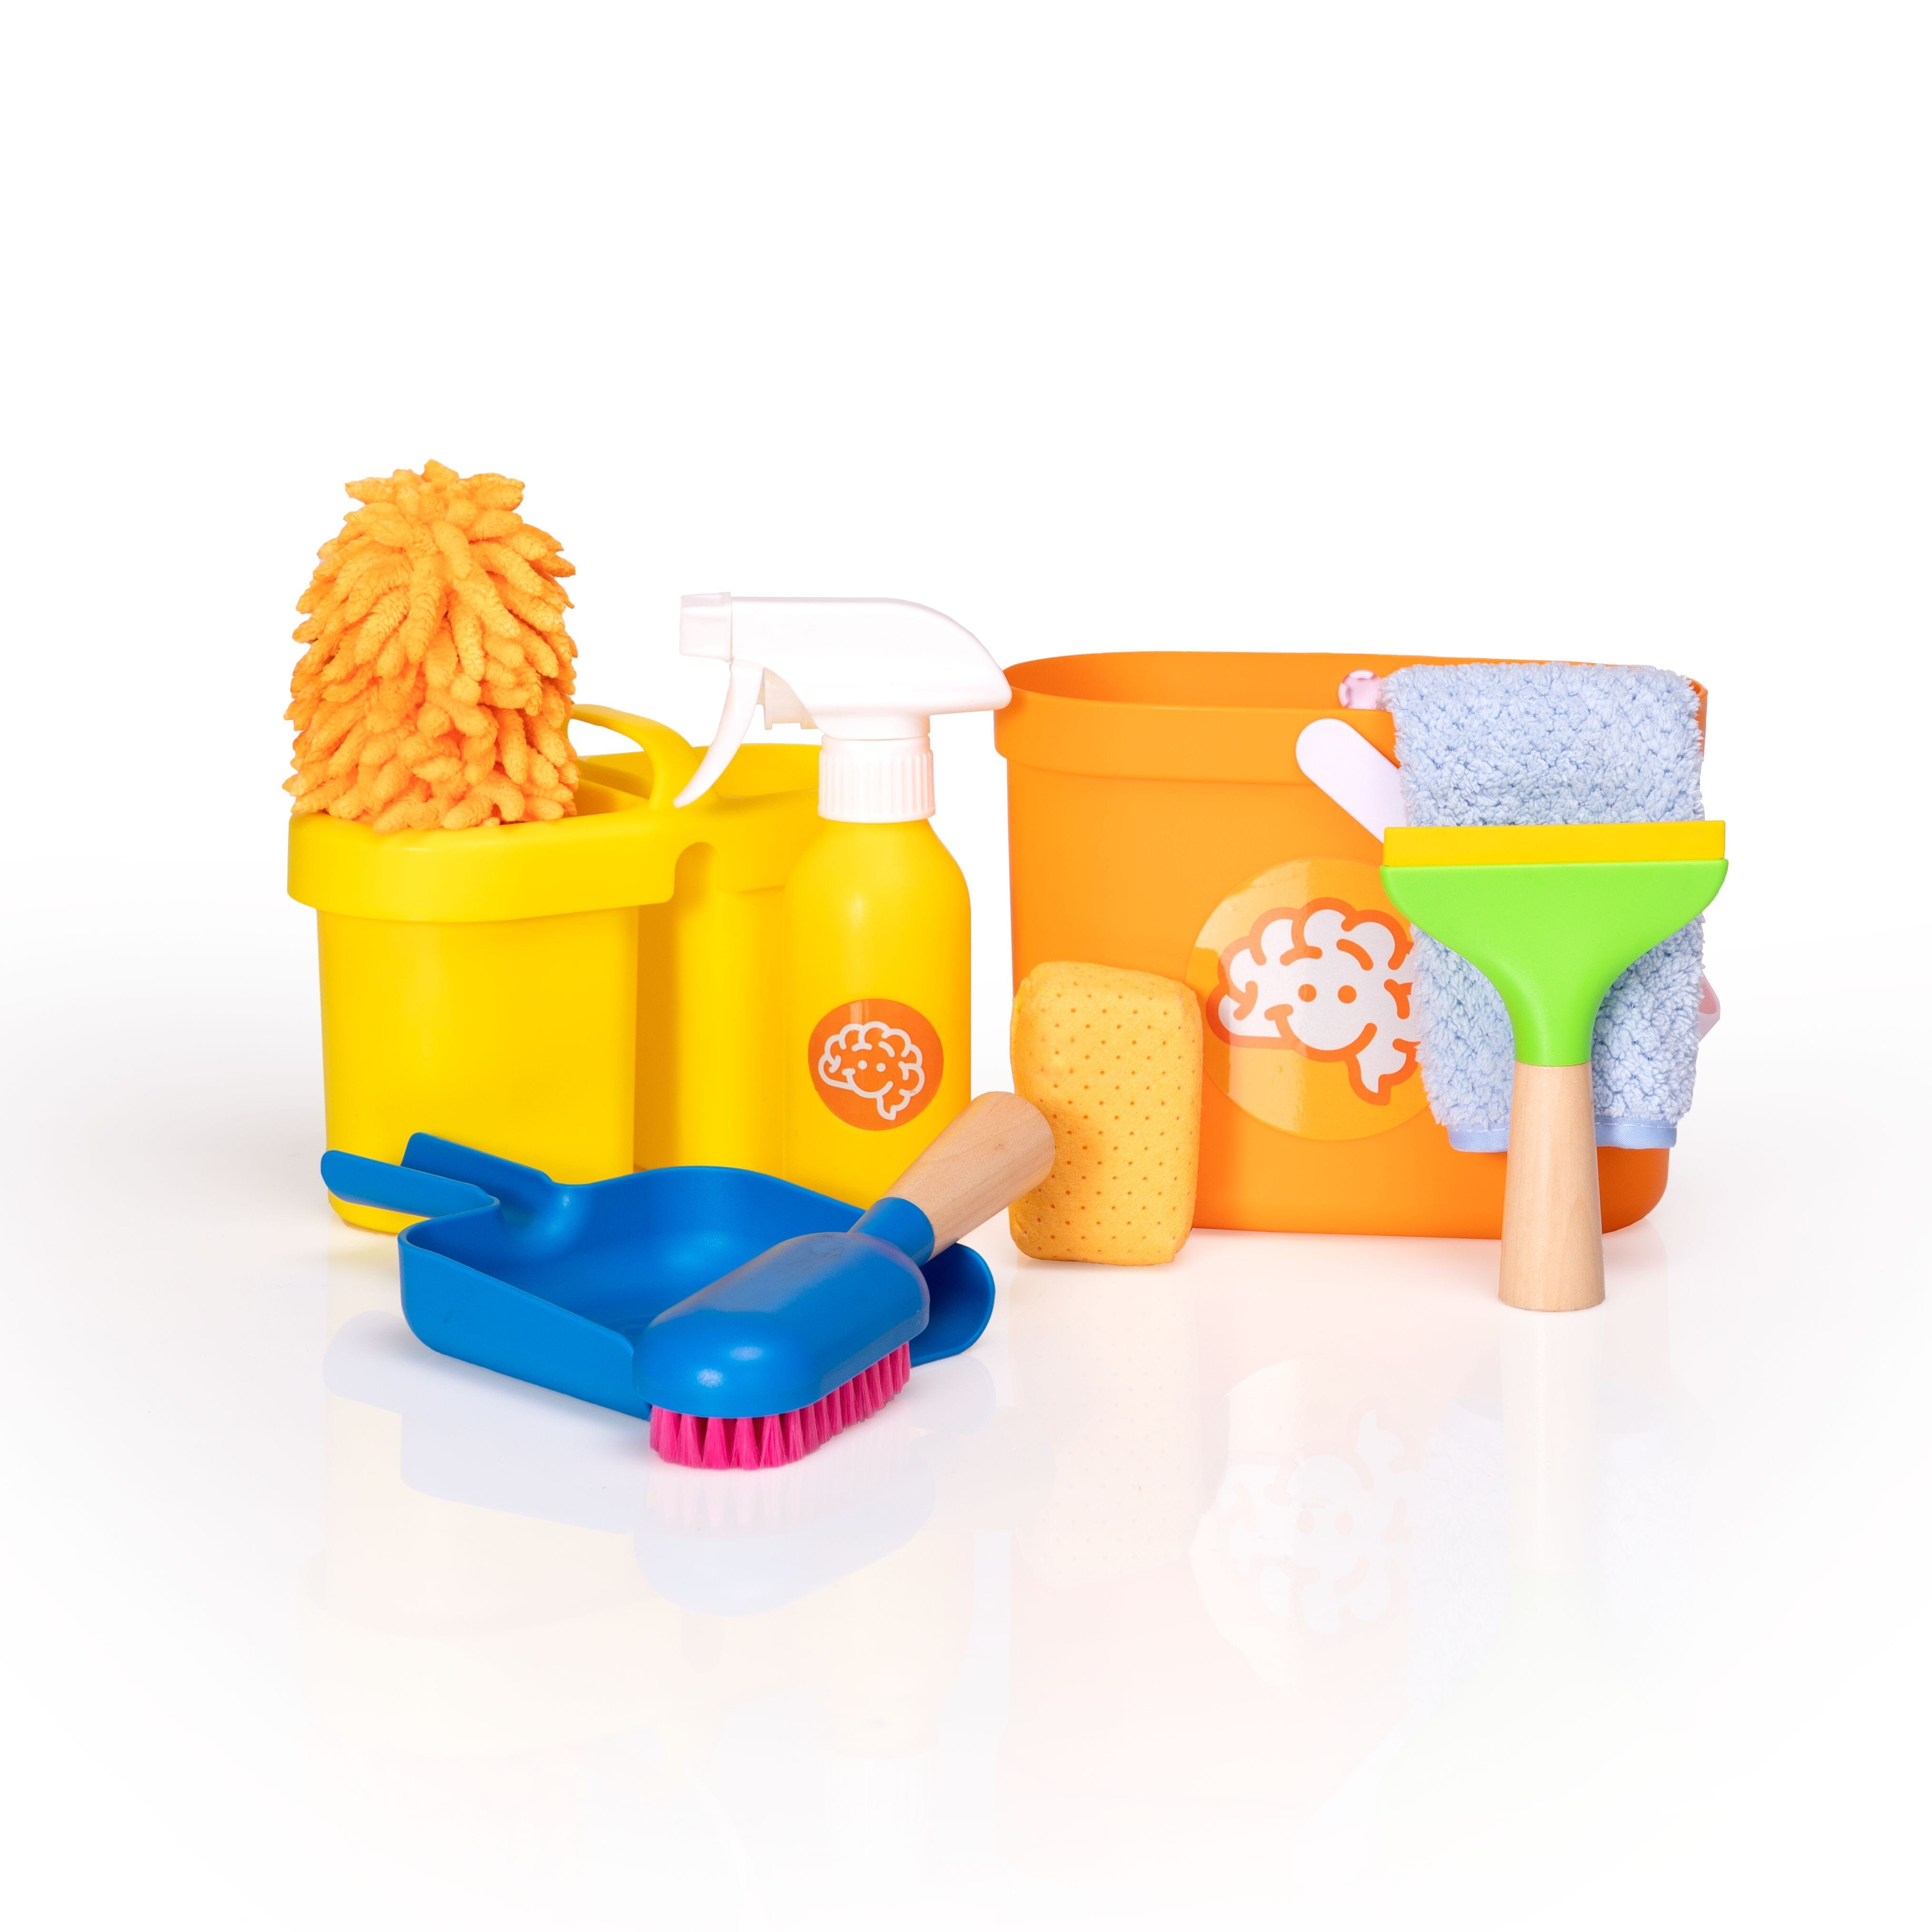 Kids Toy Cleaning Set - Pretend Play Cleaning Supplies | Meland